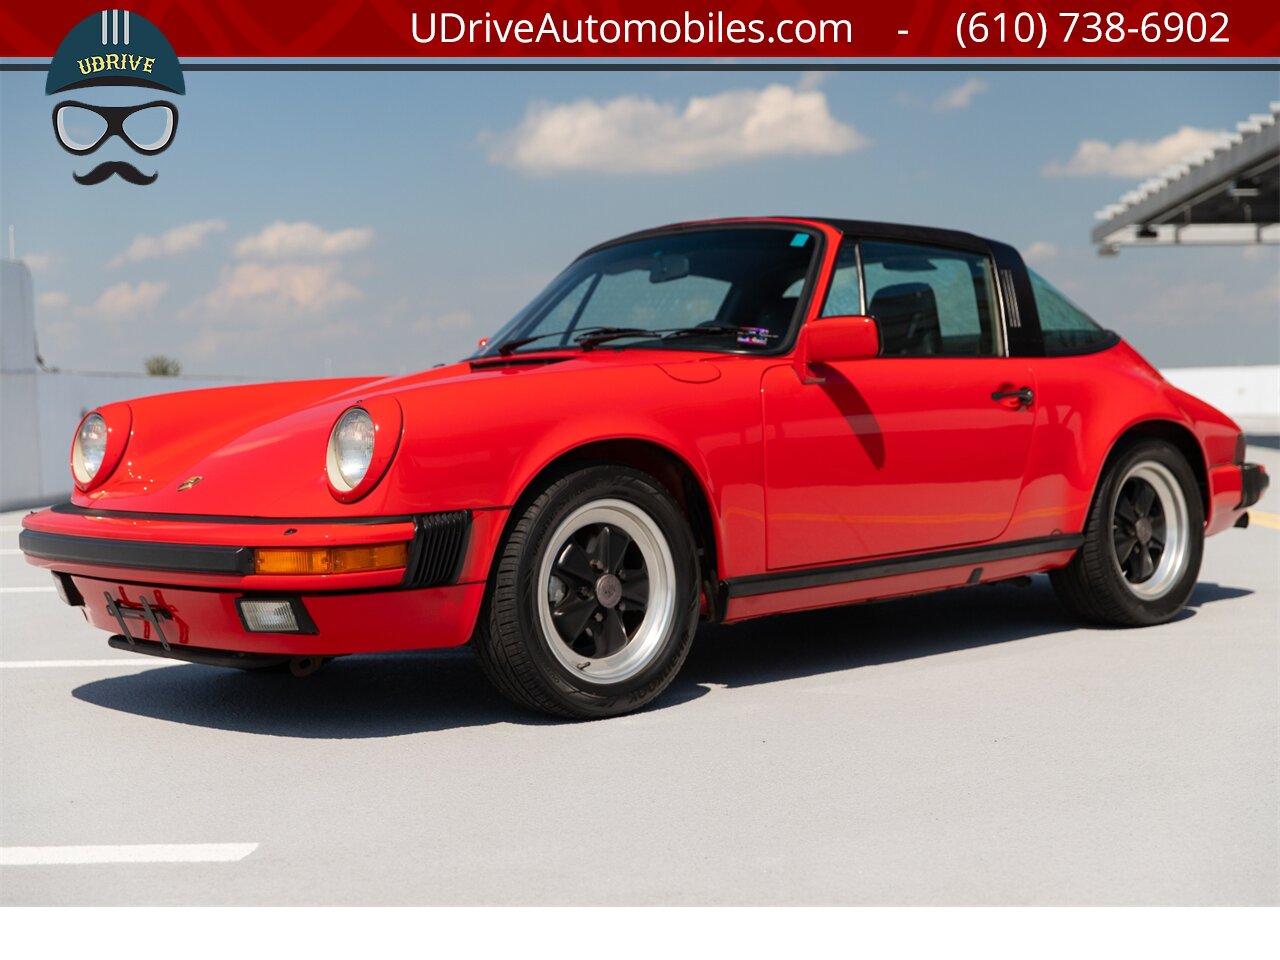 1986 Porsche 911 Carrera Targa 39k Miles Same Owner Since 1988  $23k in Service History Since 2011 - Photo 11 - West Chester, PA 19382